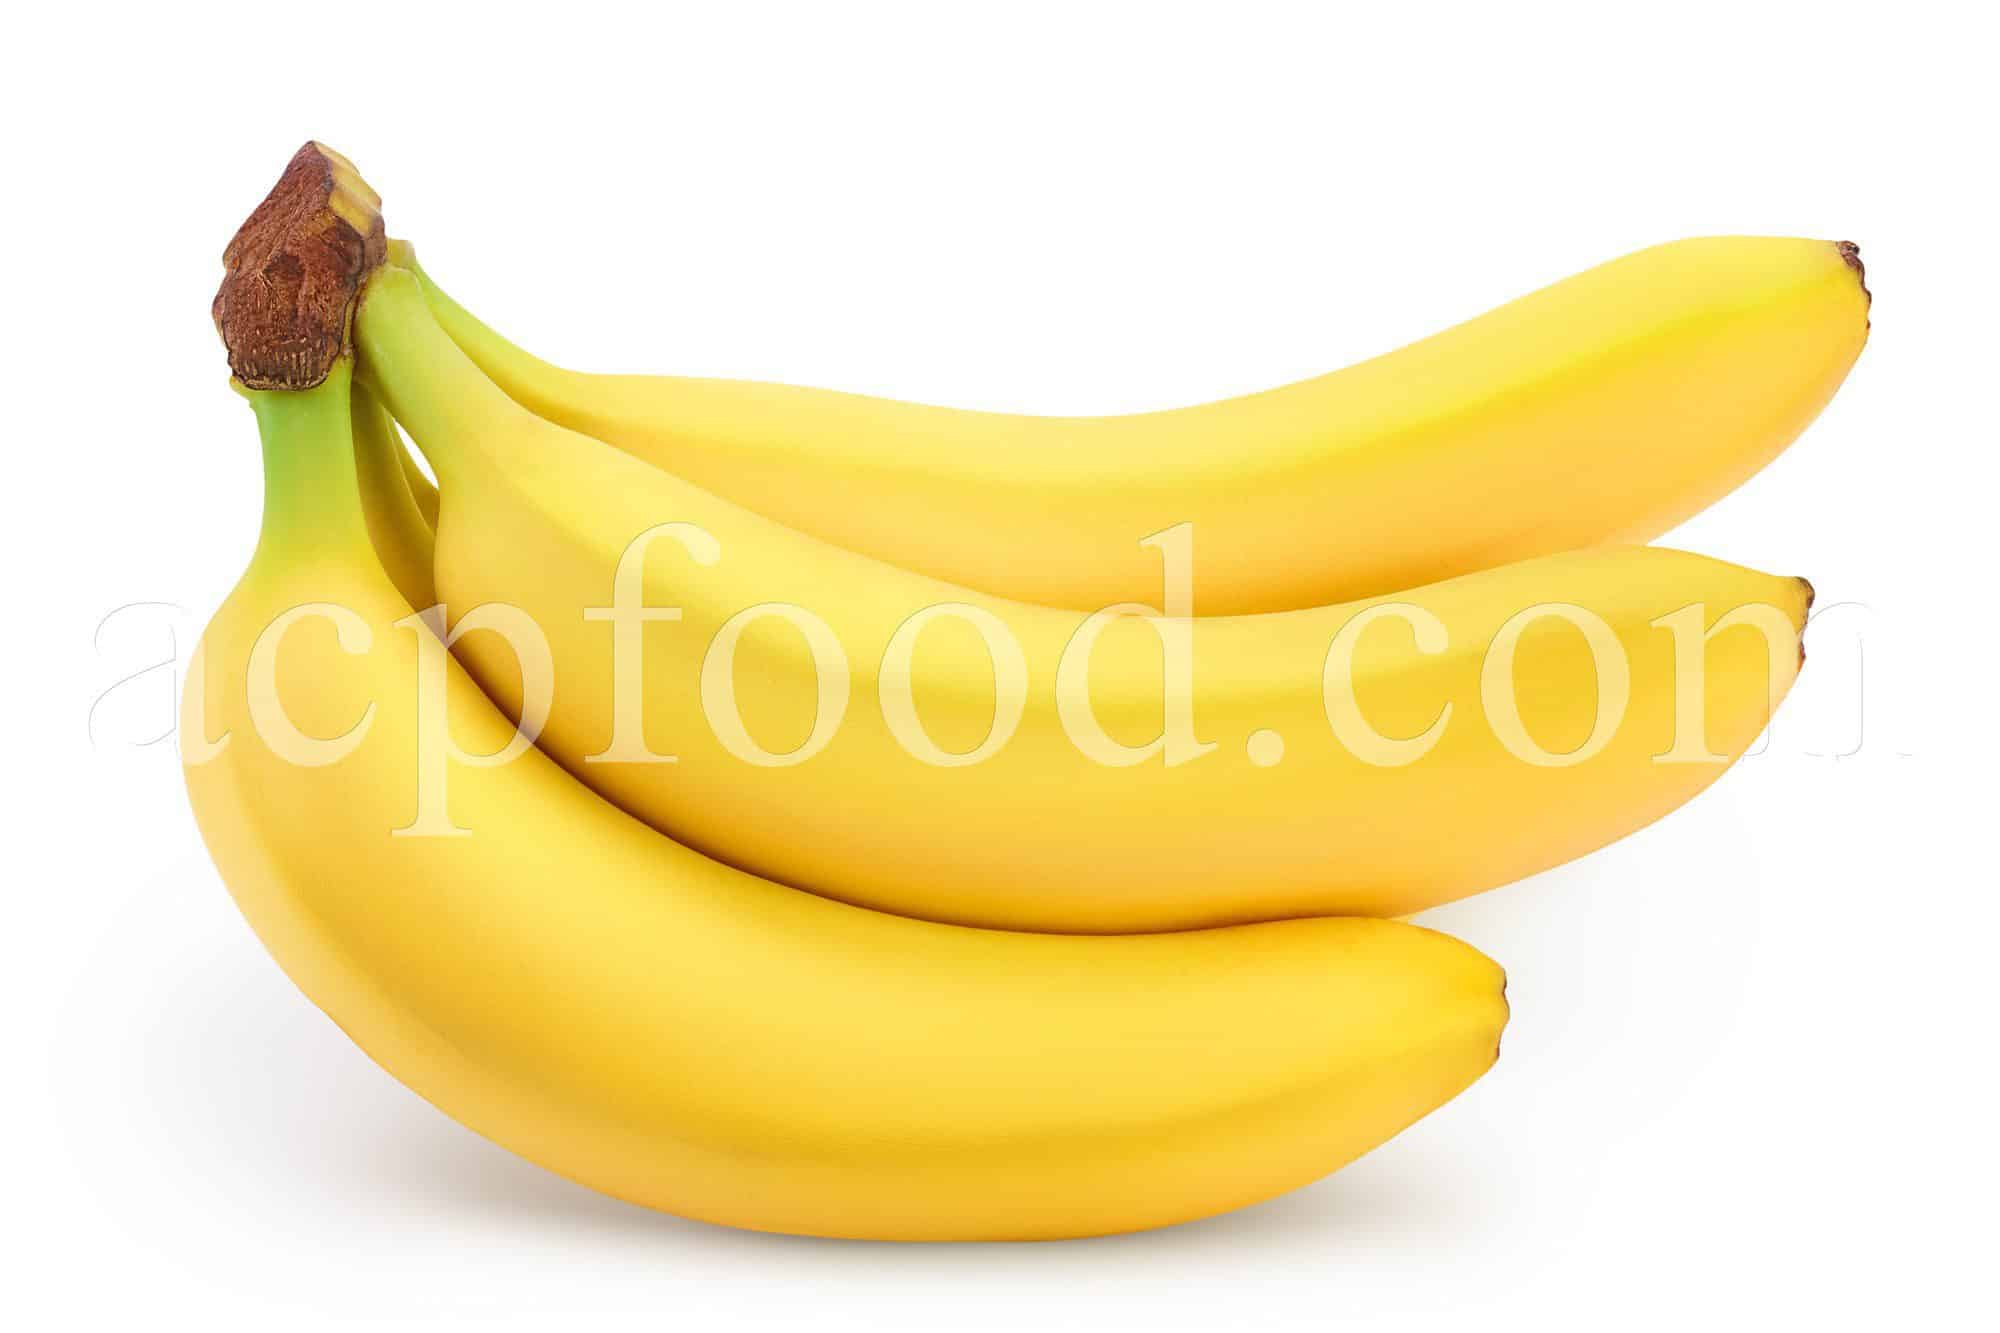 Herbs and fruits which can brighten you up. Banana